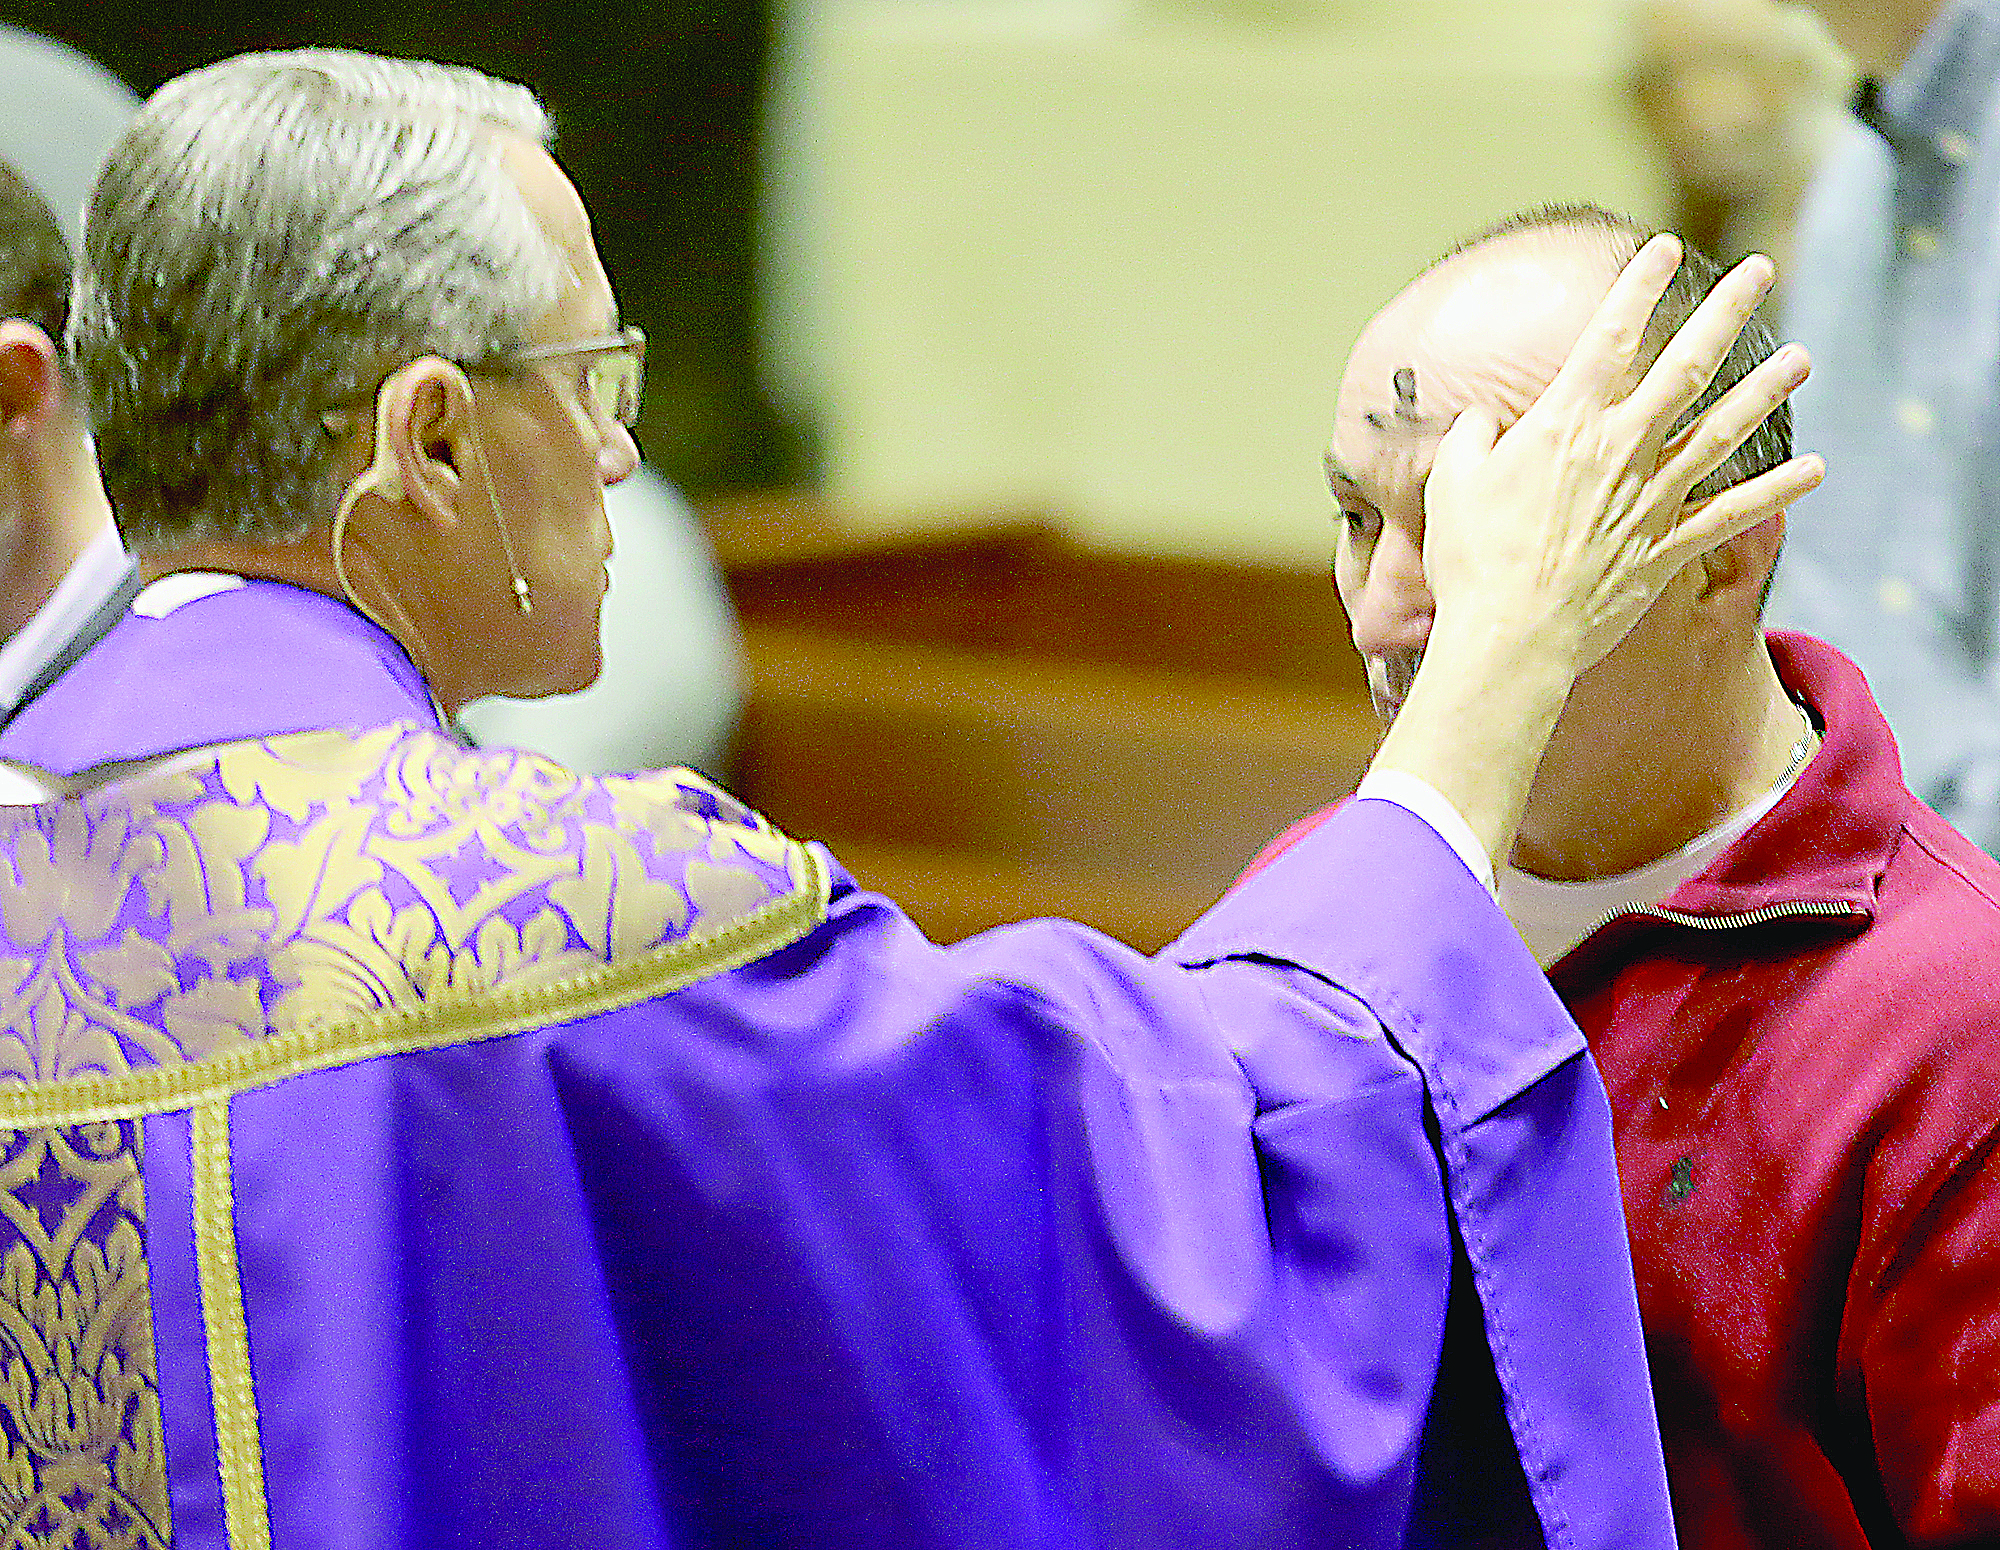 Rev. Raymond Larger marks a parishioner’s forehead with the sign of a cross during Ash Wednesday services at St. Peter in Chains Cathedral in Cincinnati Wednesday, Mar. 1, 2017. (CT PHOTO/E.L. HUBBARD)